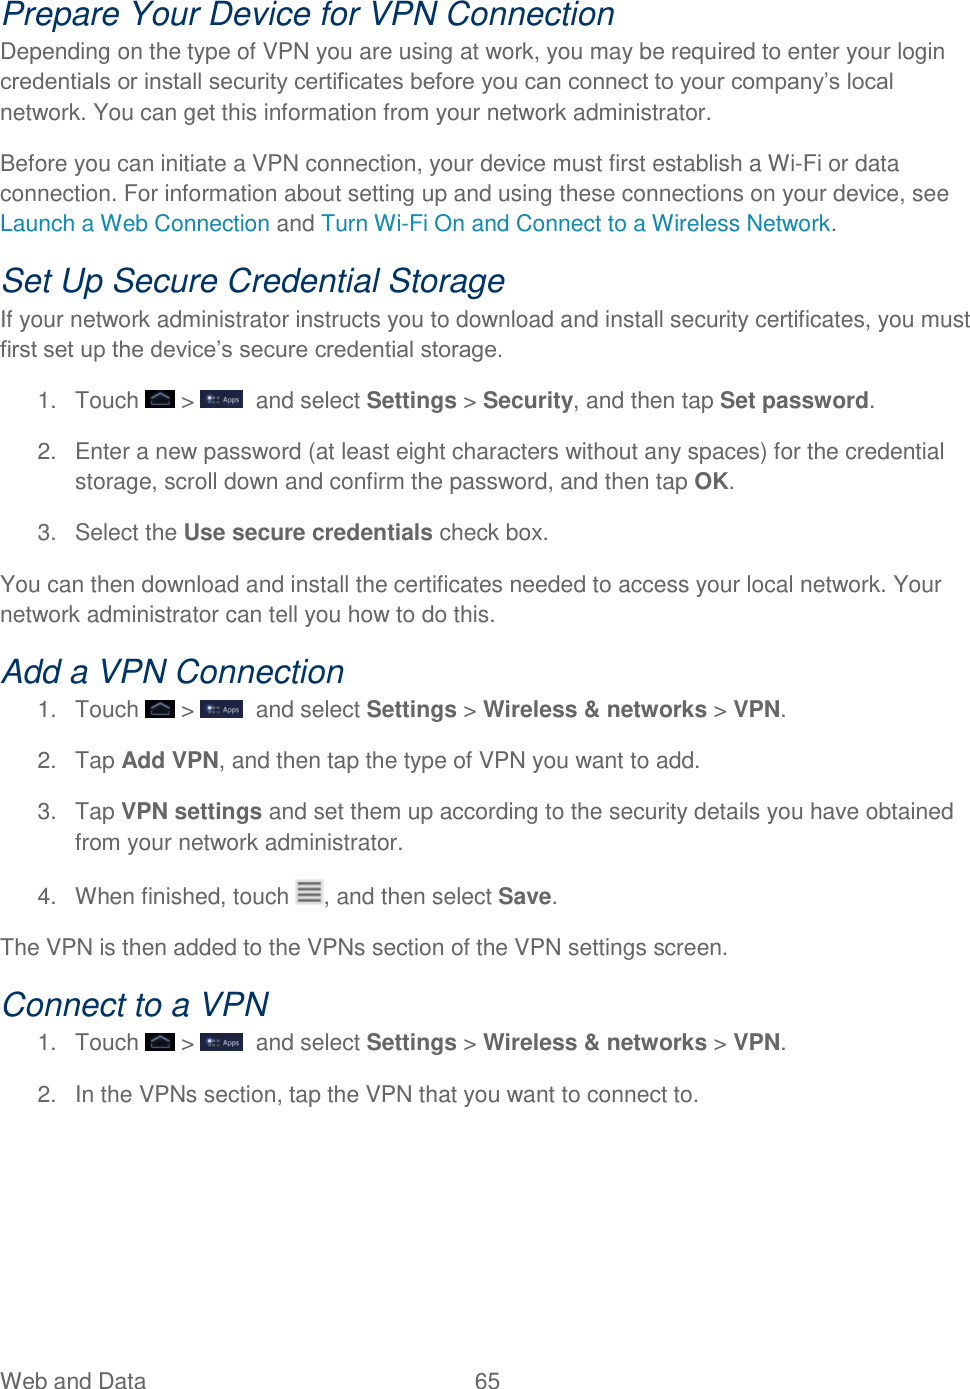 Web and Data  65   Prepare Your Device for VPN Connection Depending on the type of VPN you are using at work, you may be required to enter your login credentials or install security certificates before you can connect to your company’s local network. You can get this information from your network administrator. Before you can initiate a VPN connection, your device must first establish a Wi-Fi or data connection. For information about setting up and using these connections on your device, see Launch a Web Connection and Turn Wi-Fi On and Connect to a Wireless Network. Set Up Secure Credential Storage If your network administrator instructs you to download and install security certificates, you must first set up the device’s secure credential storage. 1.  Touch   &gt;    and select Settings &gt; Security, and then tap Set password. 2.  Enter a new password (at least eight characters without any spaces) for the credential storage, scroll down and confirm the password, and then tap OK. 3.  Select the Use secure credentials check box. You can then download and install the certificates needed to access your local network. Your network administrator can tell you how to do this. Add a VPN Connection 1.  Touch   &gt;    and select Settings &gt; Wireless &amp; networks &gt; VPN. 2.  Tap Add VPN, and then tap the type of VPN you want to add. 3.  Tap VPN settings and set them up according to the security details you have obtained from your network administrator. 4.  When finished, touch  , and then select Save. The VPN is then added to the VPNs section of the VPN settings screen. Connect to a VPN 1.  Touch   &gt;    and select Settings &gt; Wireless &amp; networks &gt; VPN. 2.  In the VPNs section, tap the VPN that you want to connect to. 